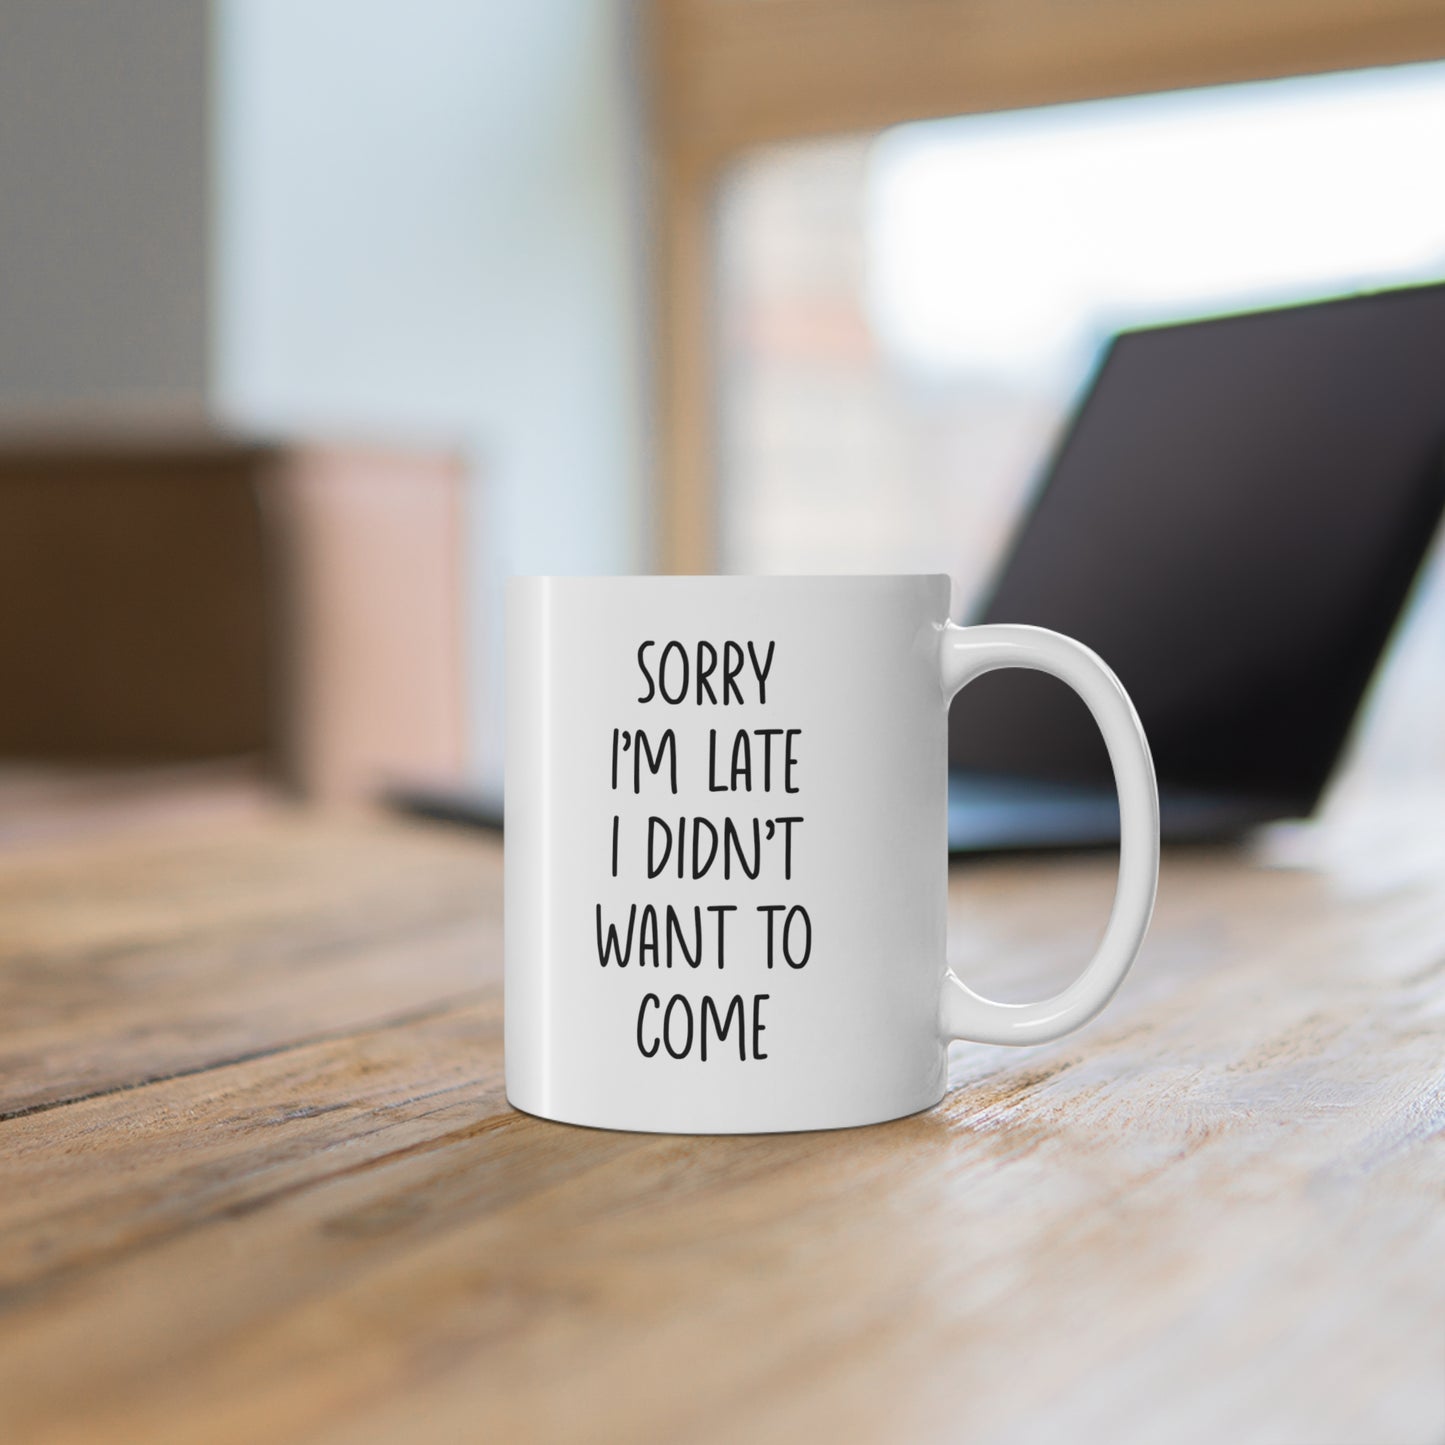 withe ceramic mug with quote: Sorry I'm Late I Didn't Want to Come